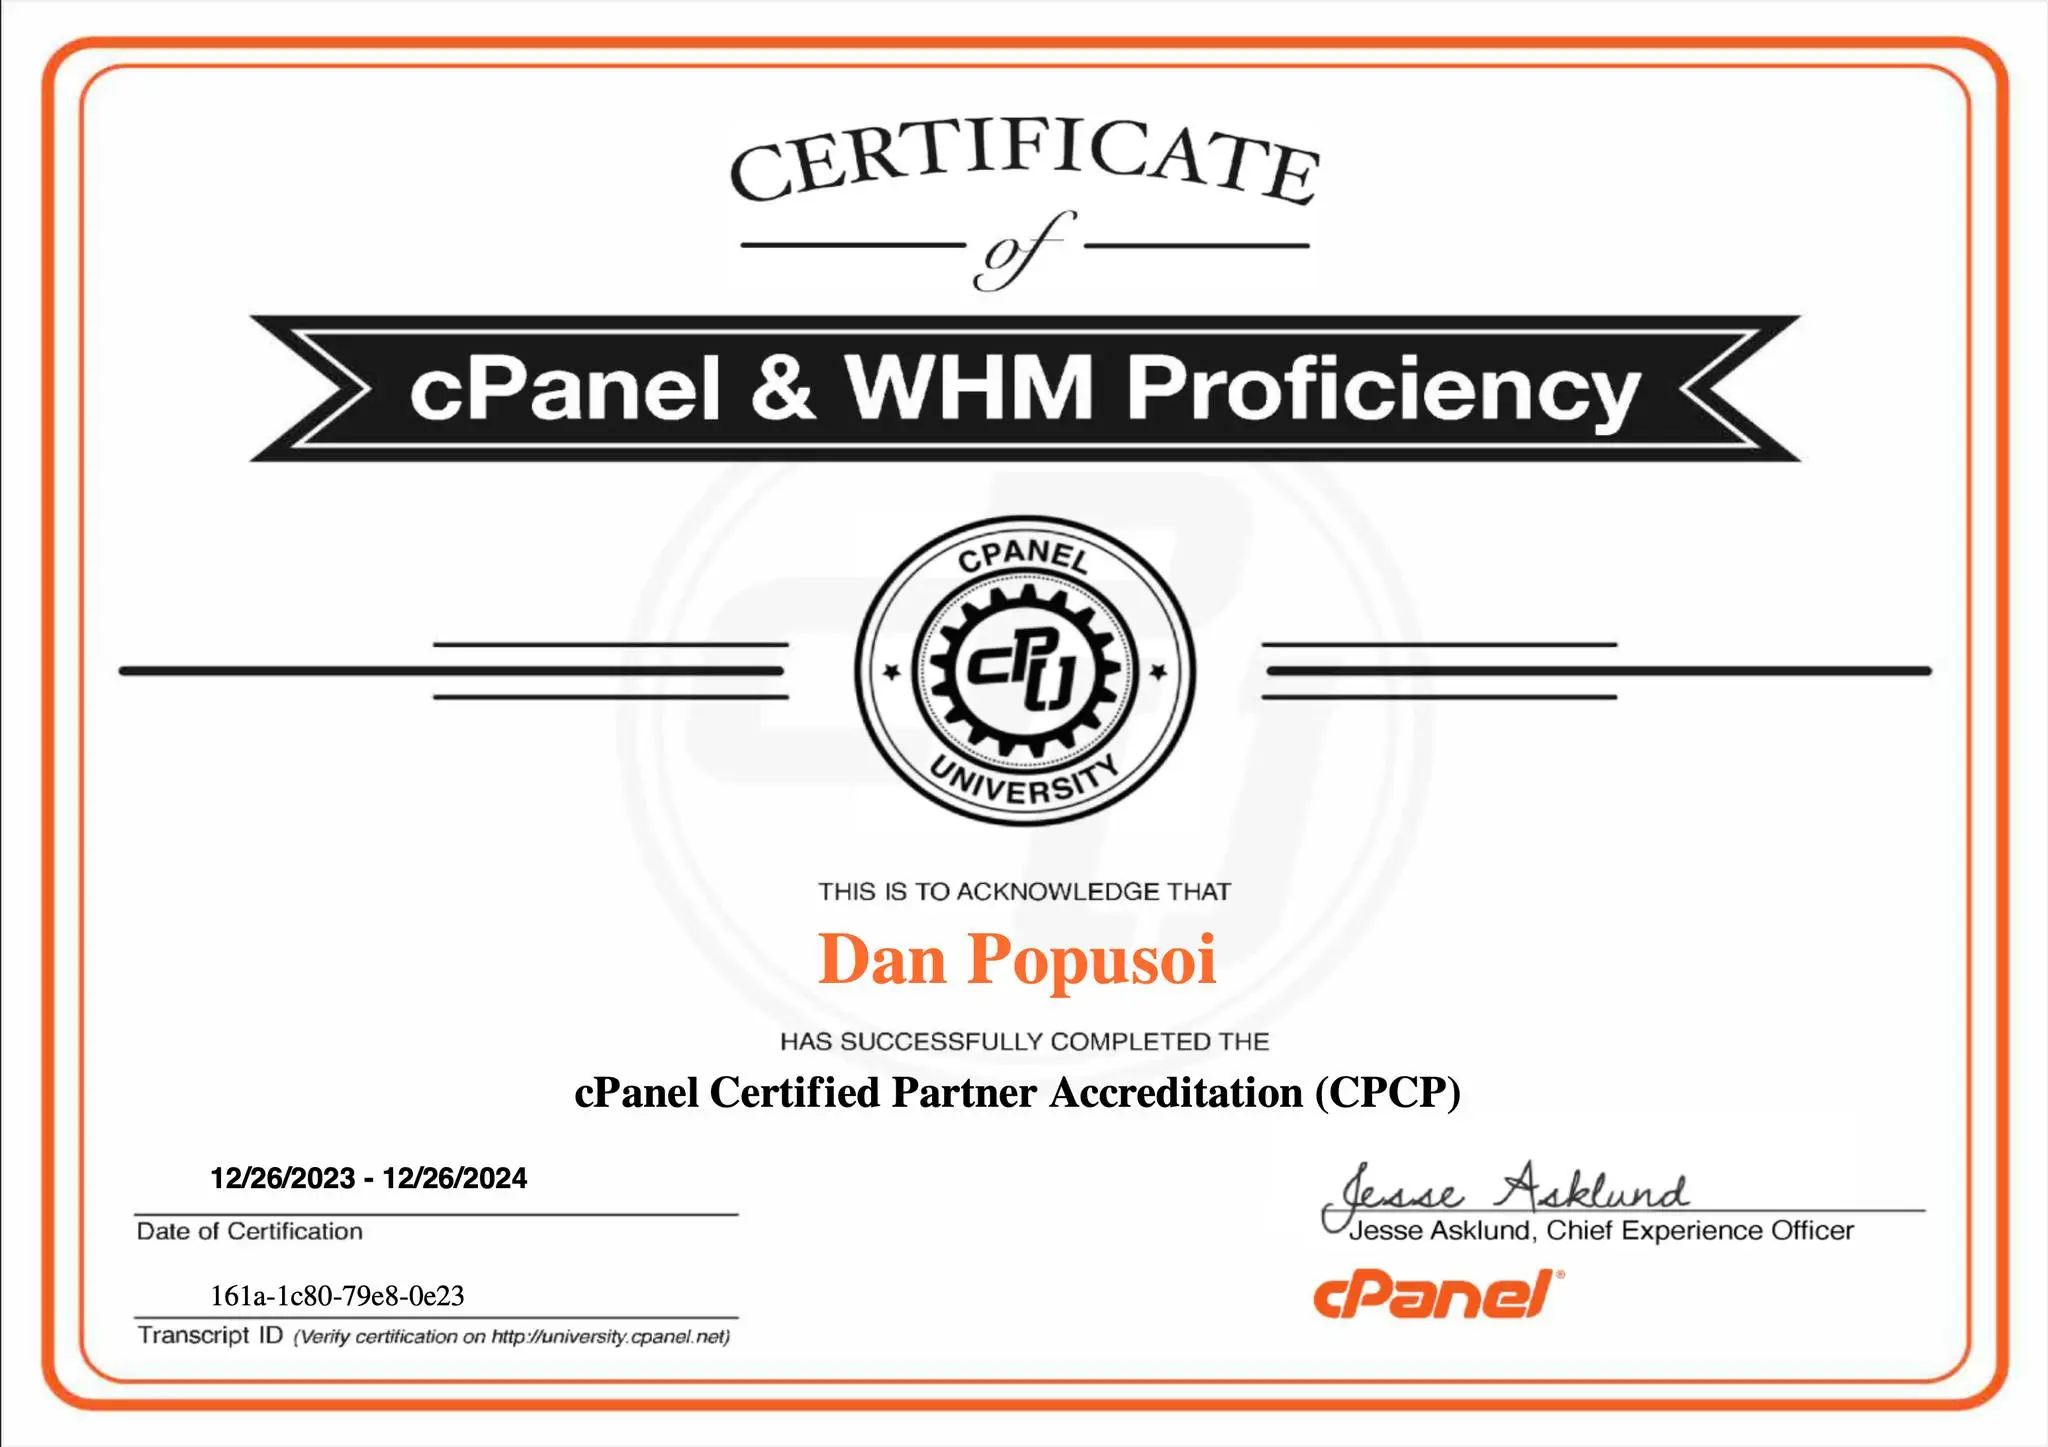 IP Host Becomes cPanel Certified Partner: Ensuring Security and Performance Without Compromise!